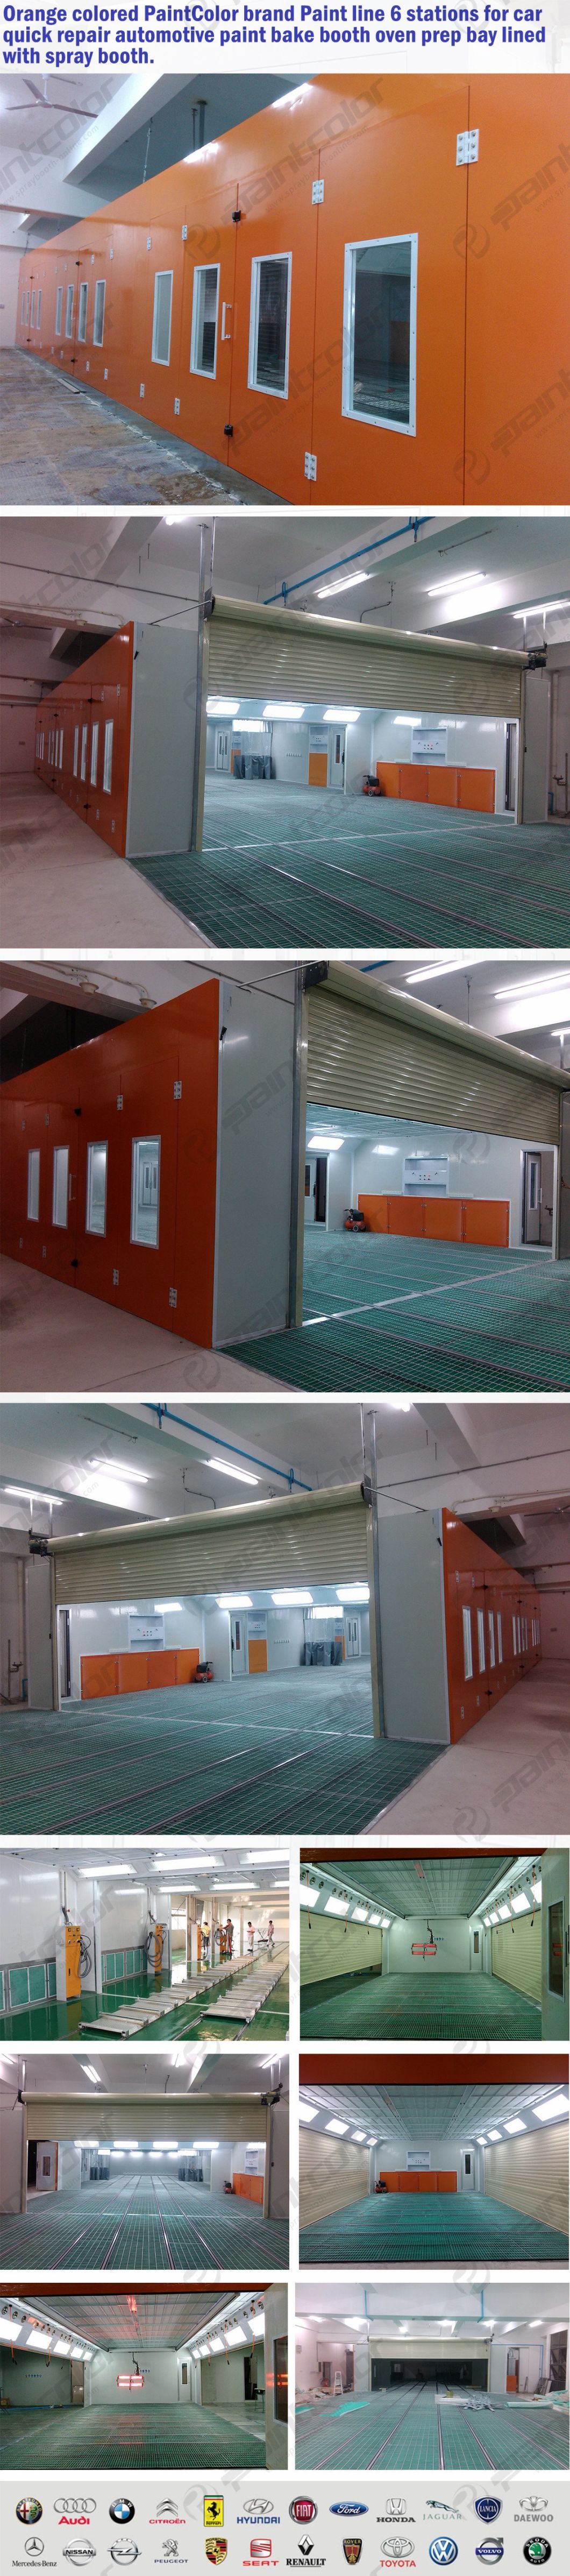 Spray Booth Industrial Baking Oven Paint Booth with Over 15 Years of Experience The Highest Quality Paint Cabin Available